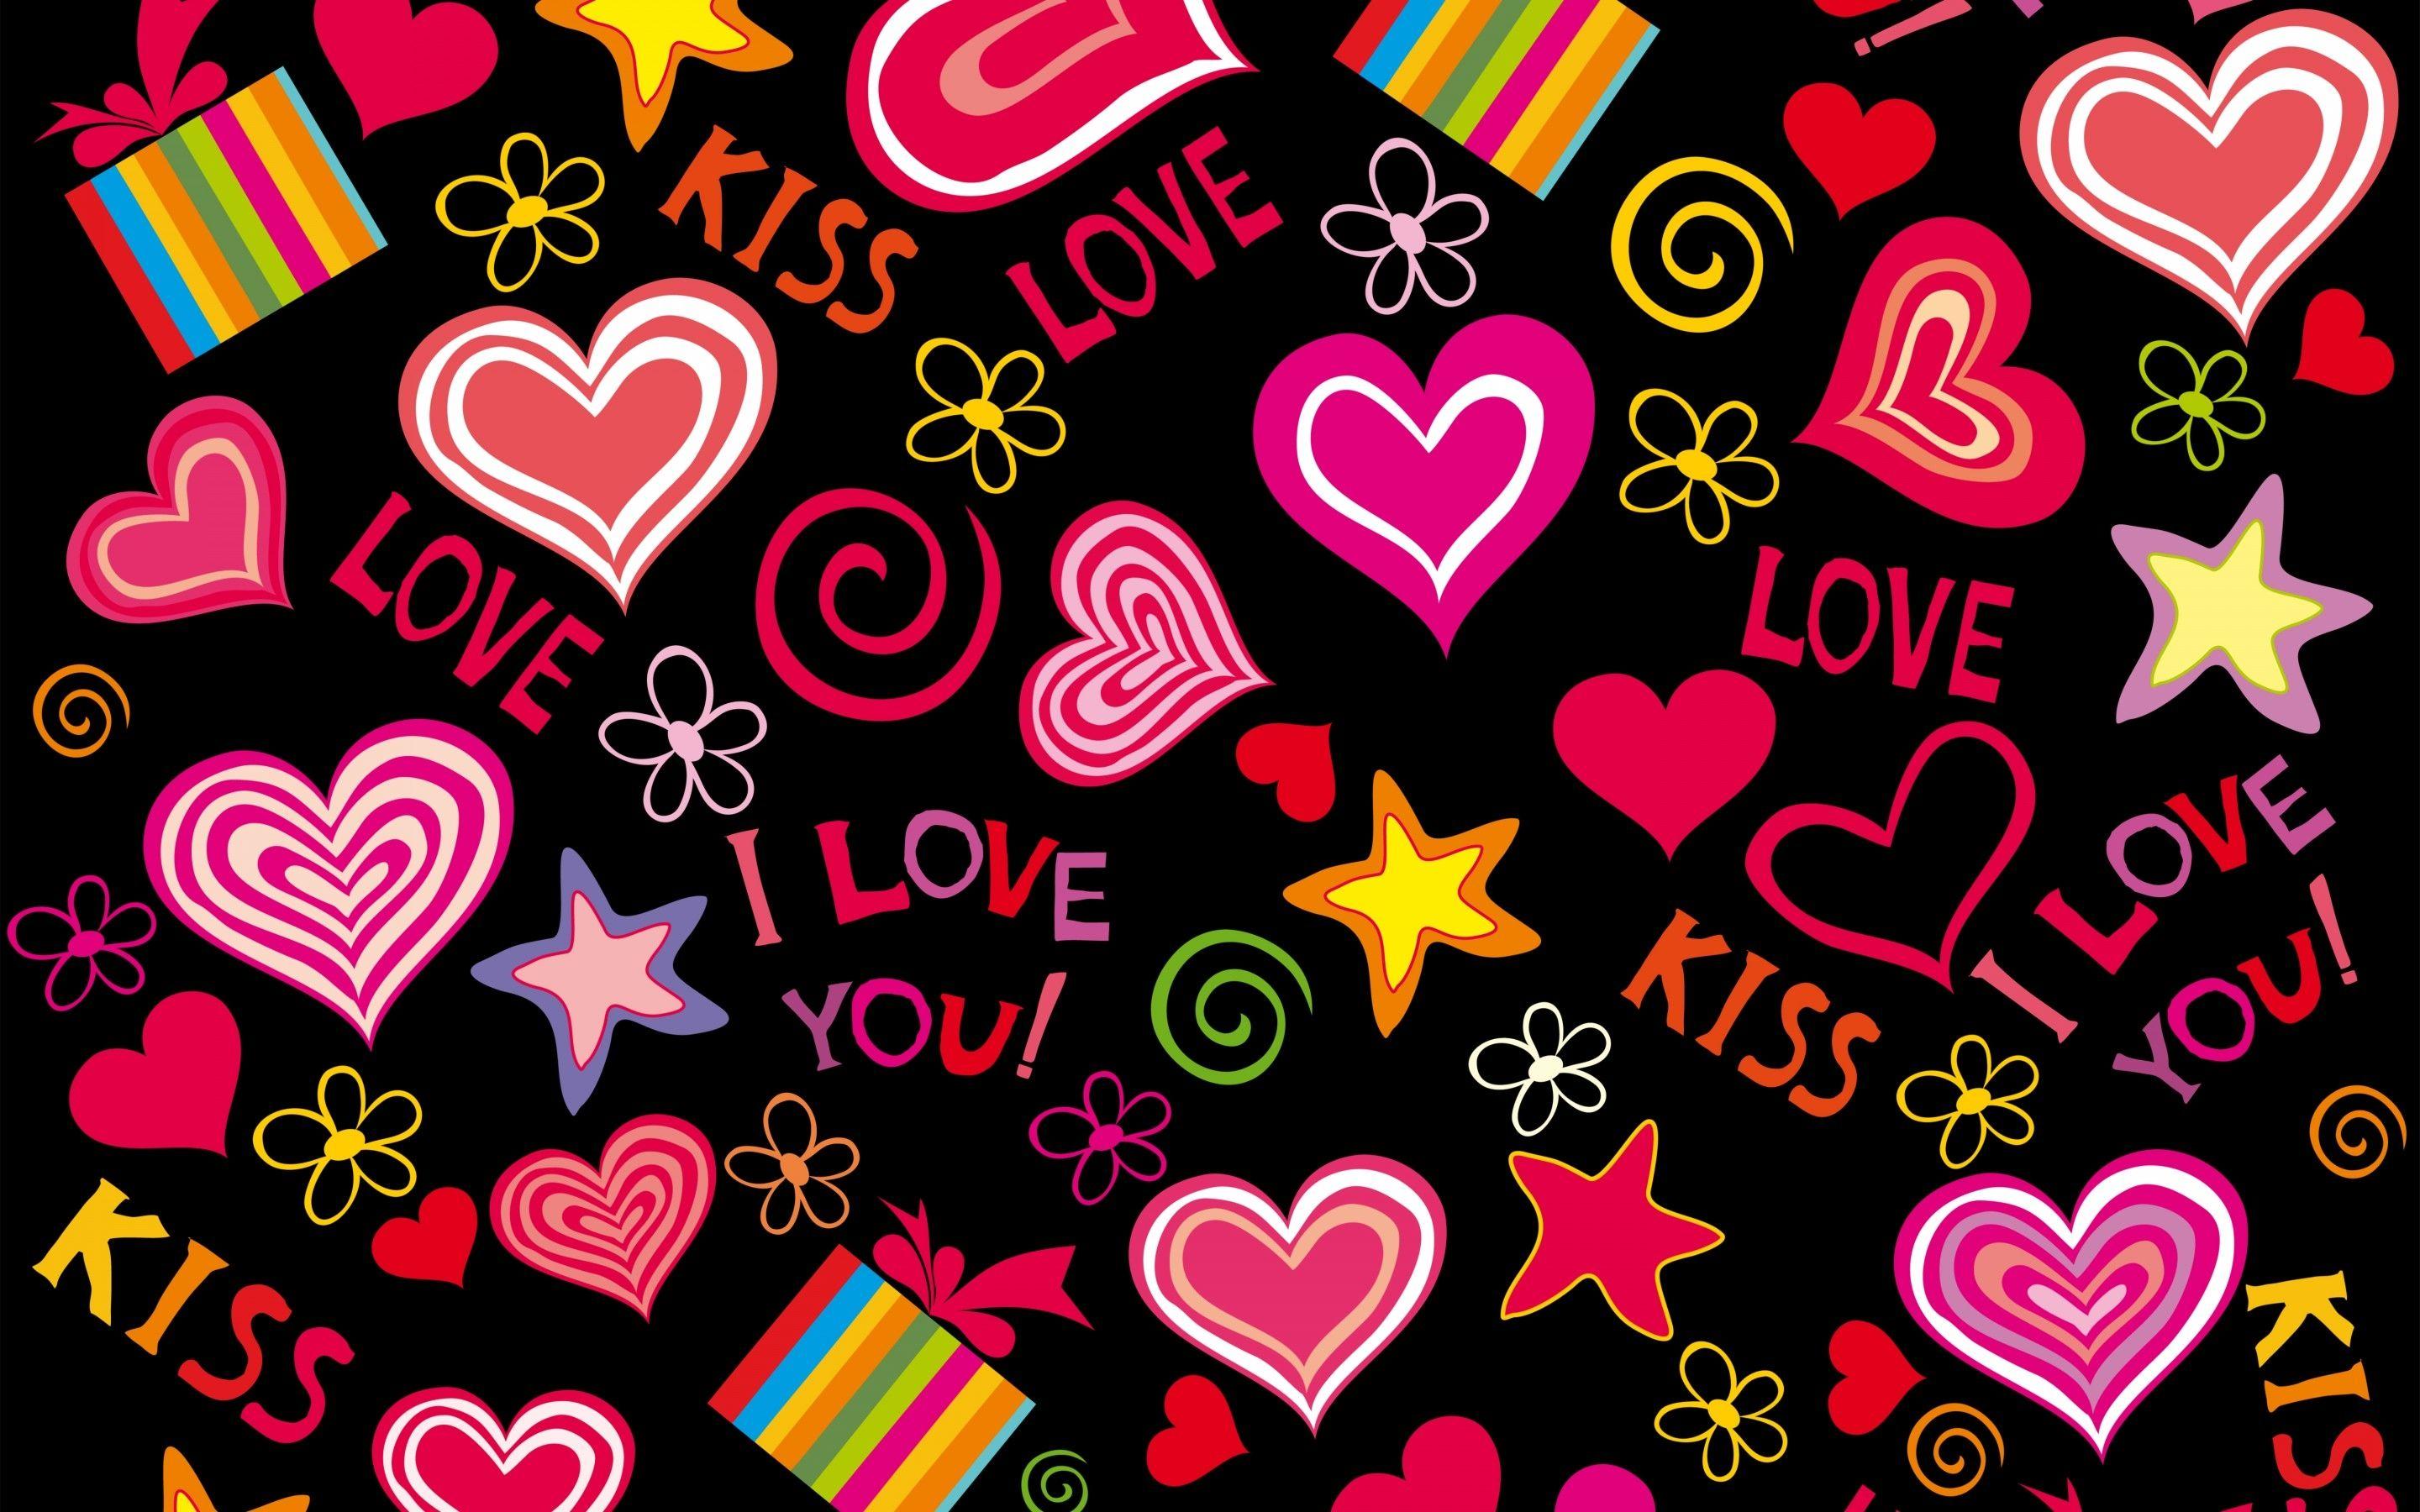 Love Hearts Full HD Wallpaper and Background Imagex1800